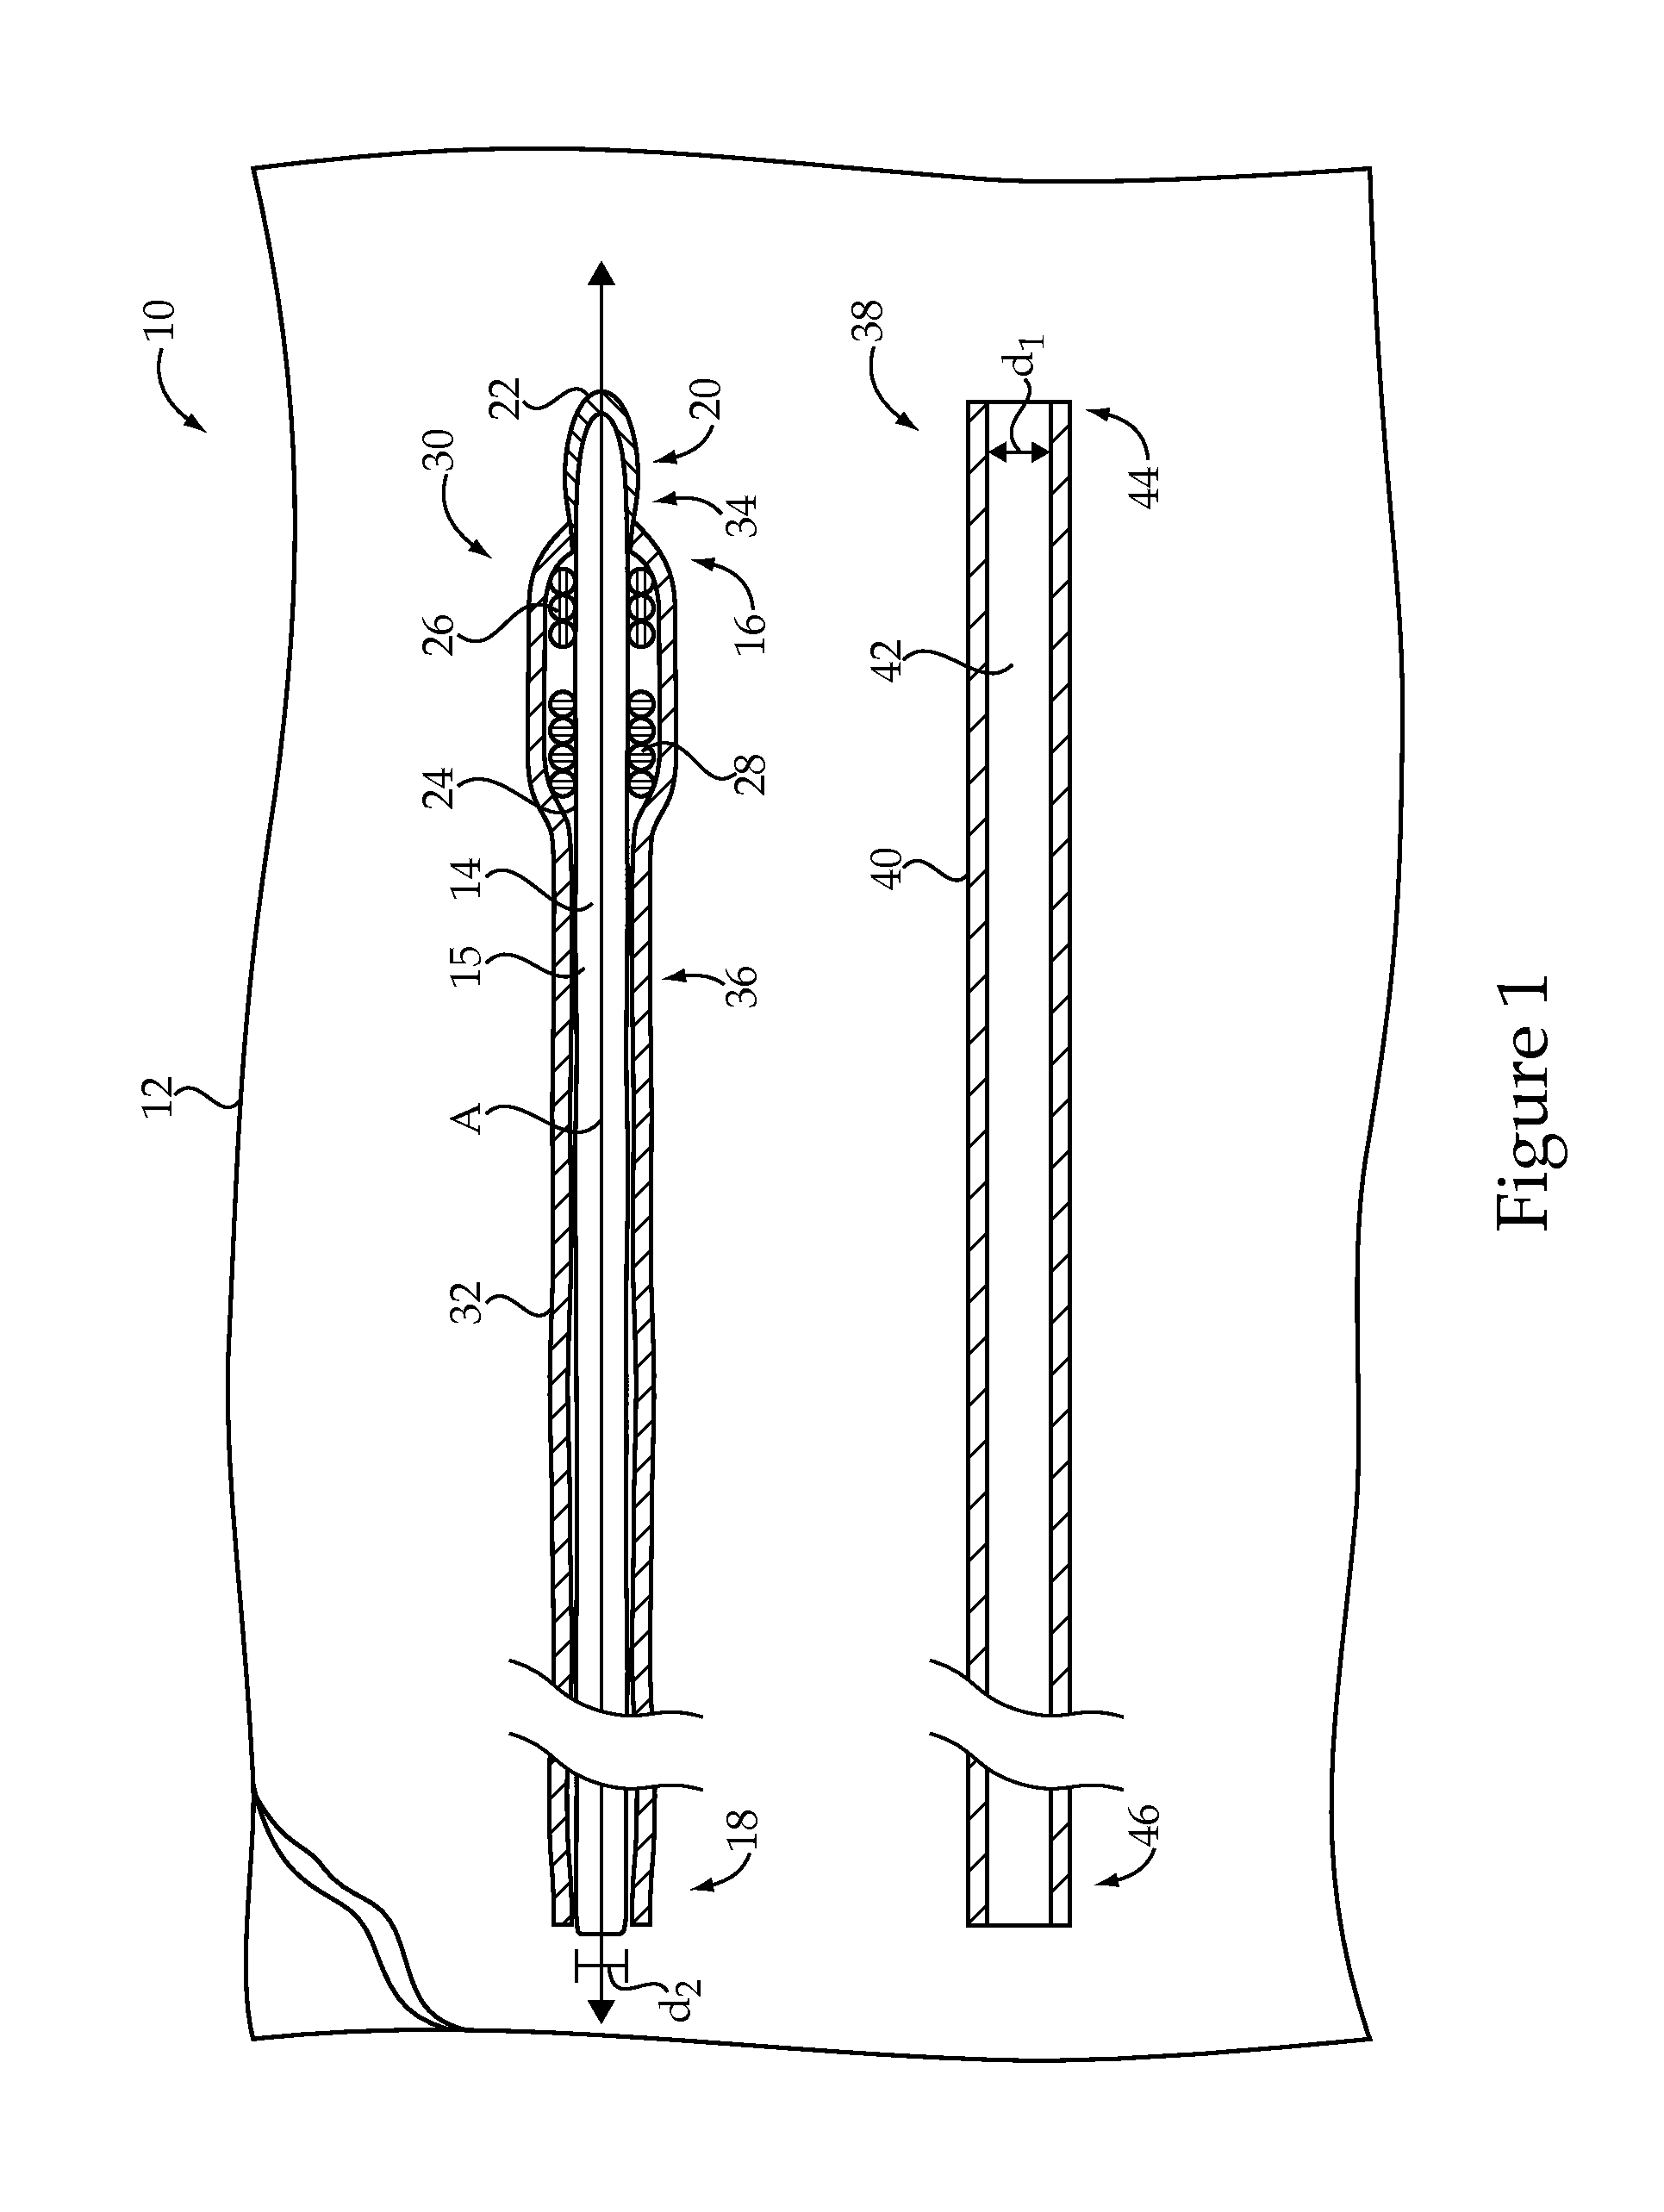 Embolic Coil Delivery System